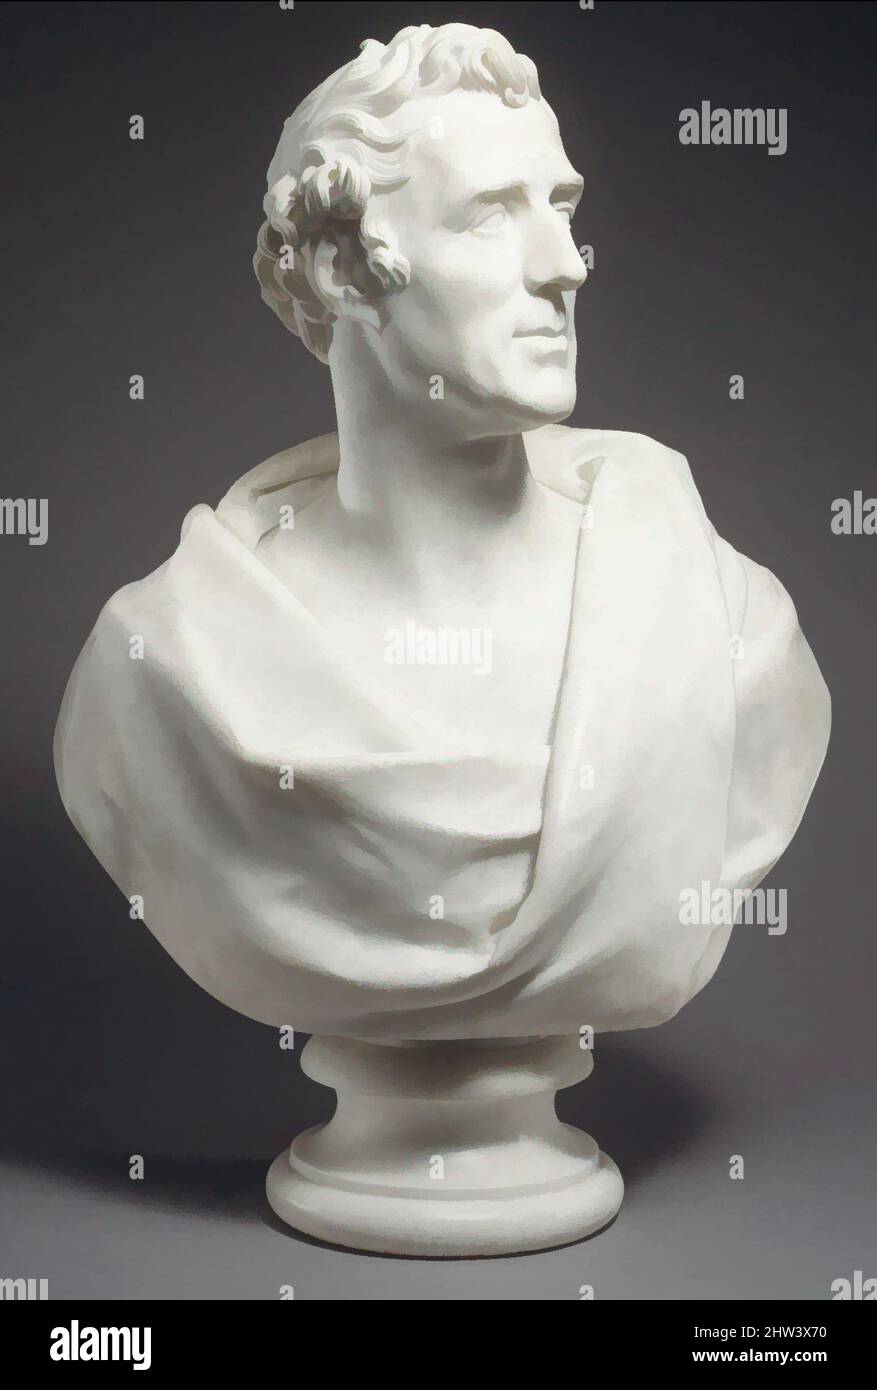 Art inspired by Arthur Wellesley (1769–1852), 1st Duke of Wellington, 1823, British, Marble; column of red scagliola with marble foot, Height (bust): 25 3/4 in. (65.4 cm); Height (column): 47 3/4 in. (121.3 cm), Sculpture, Sir Francis Chantrey (British, 1781–1841), Wellington led the, Classic works modernized by Artotop with a splash of modernity. Shapes, color and value, eye-catching visual impact on art. Emotions through freedom of artworks in a contemporary way. A timeless message pursuing a wildly creative new direction. Artists turning to the digital medium and creating the Artotop NFT Stock Photo